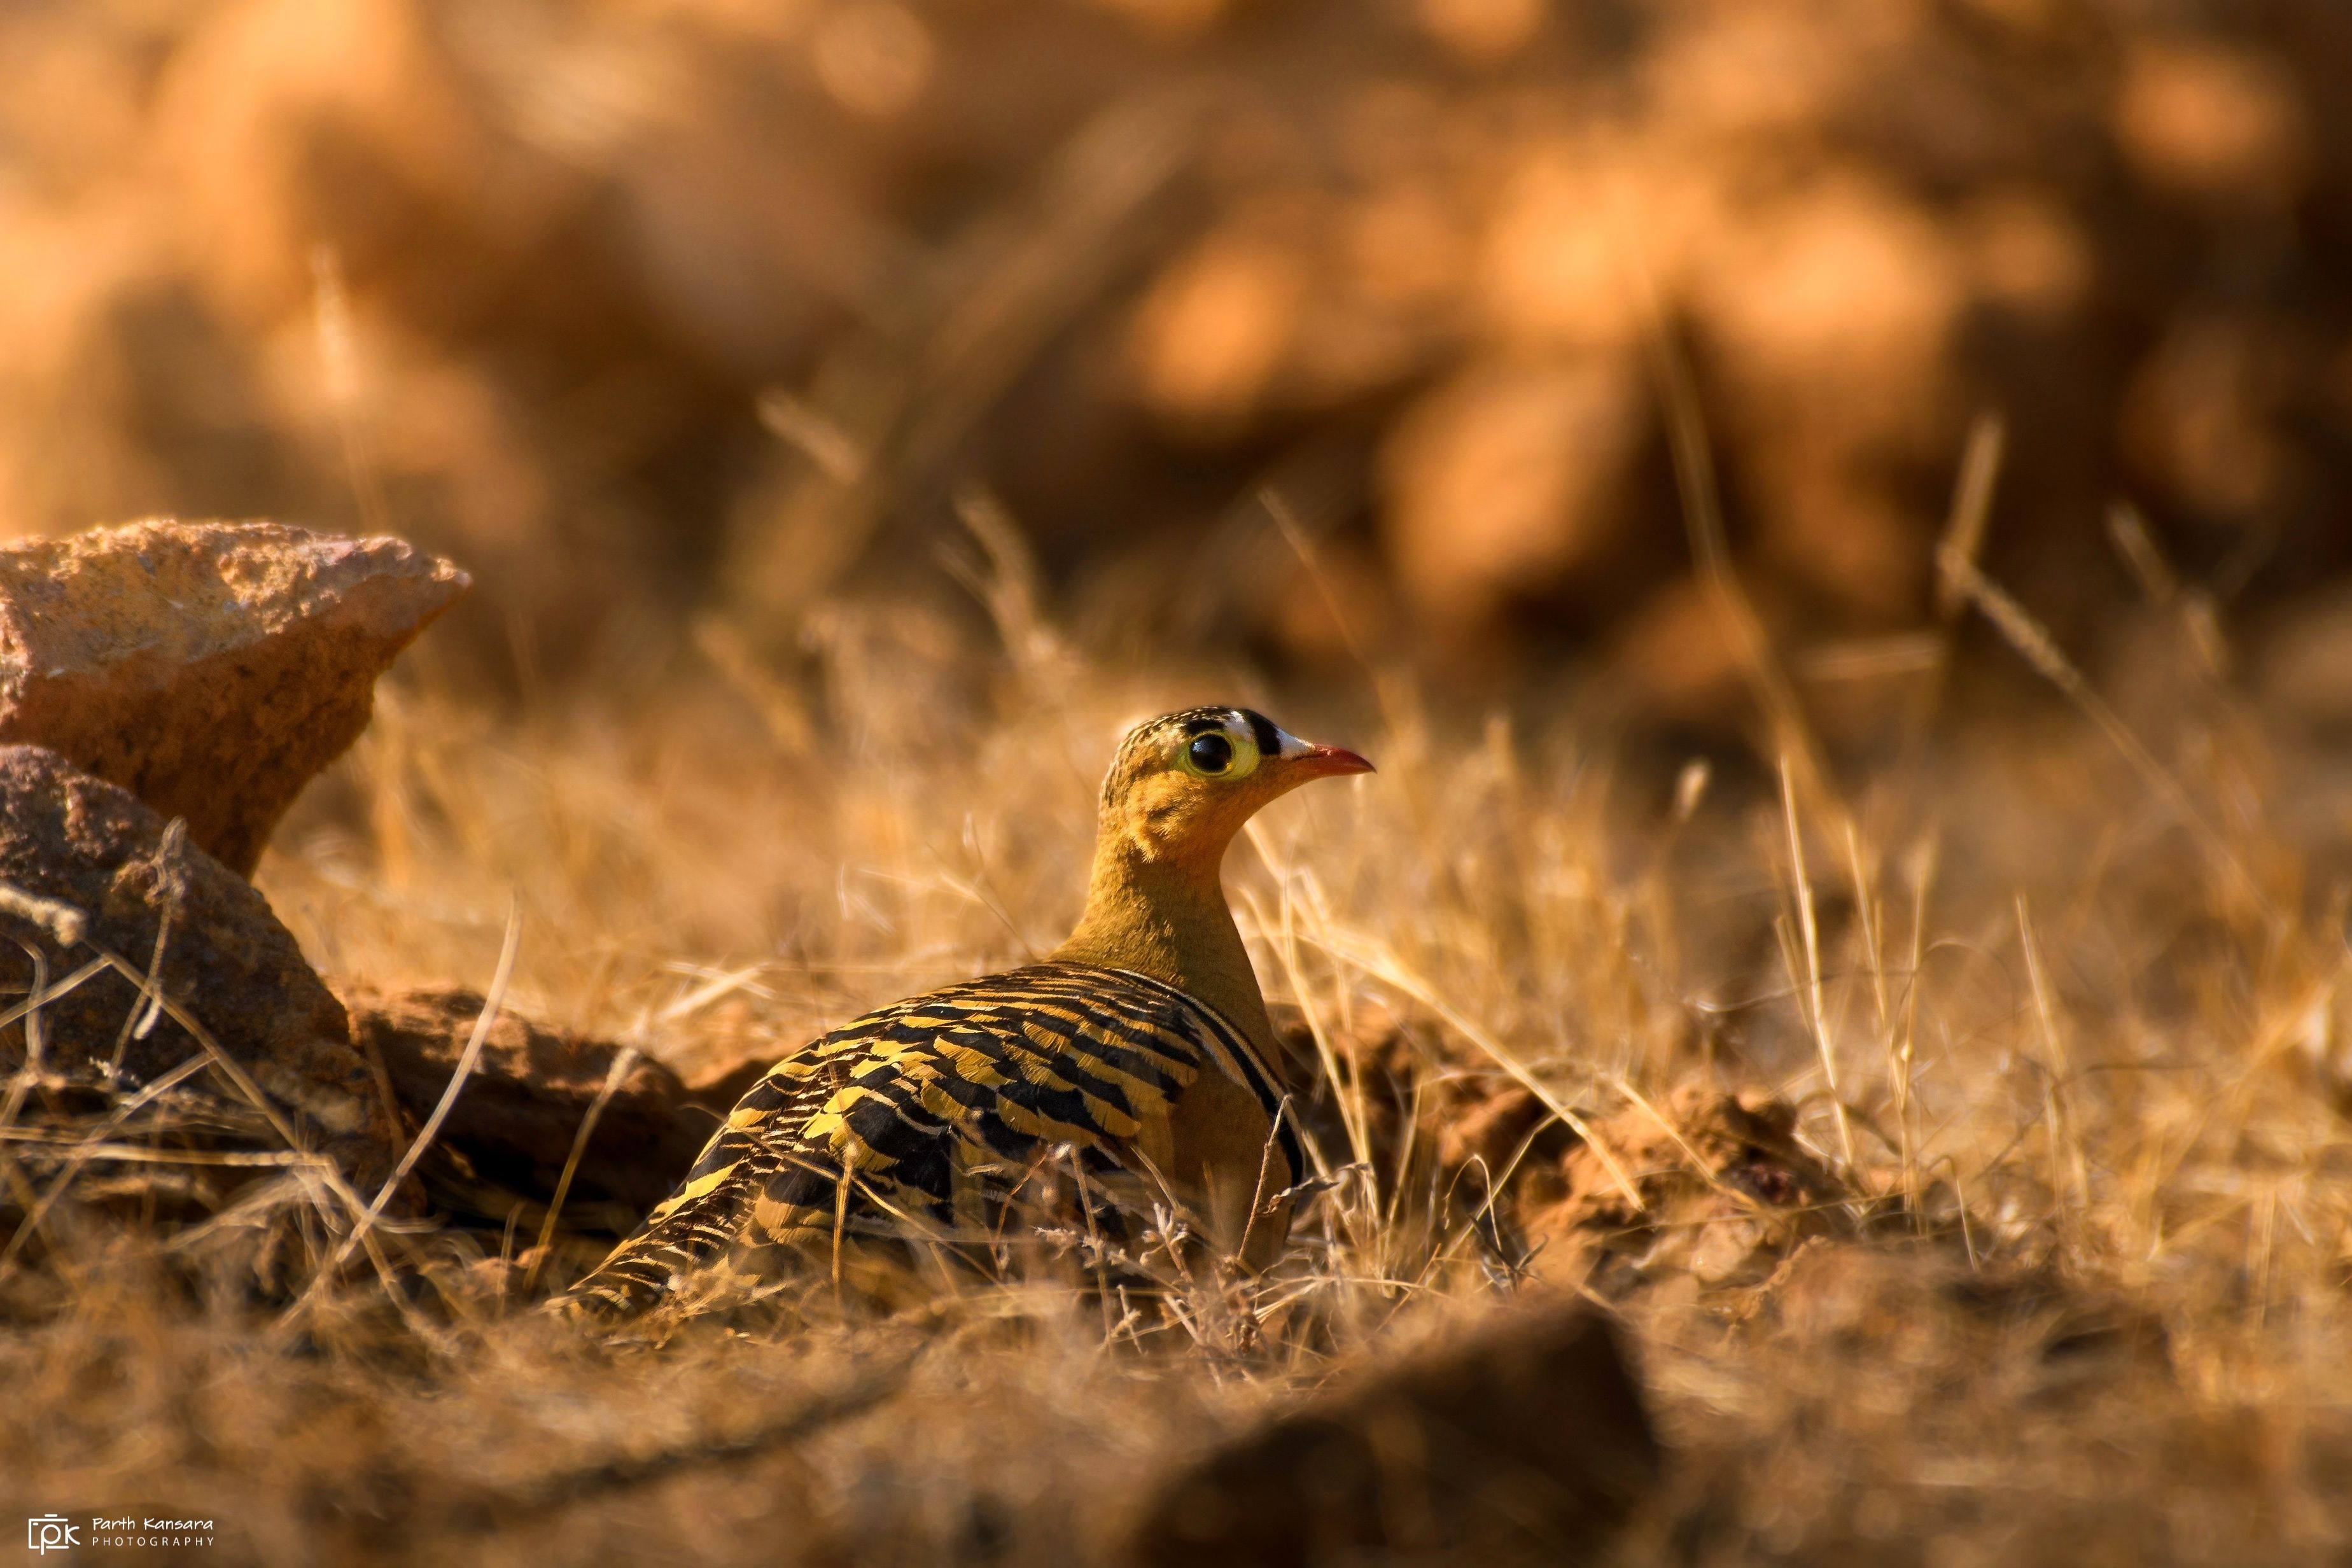 painted sandgrouse, pterocles indicus, grk, greater rann of kutch, nature, 35awards, 35photo, wildlife, birds, birds of india, parth kansara, parth kansara wildlife, indian wildlife, photo, photography, kutch, birds of kutch, nakhatrana, kutch wildlife,, kansara parth